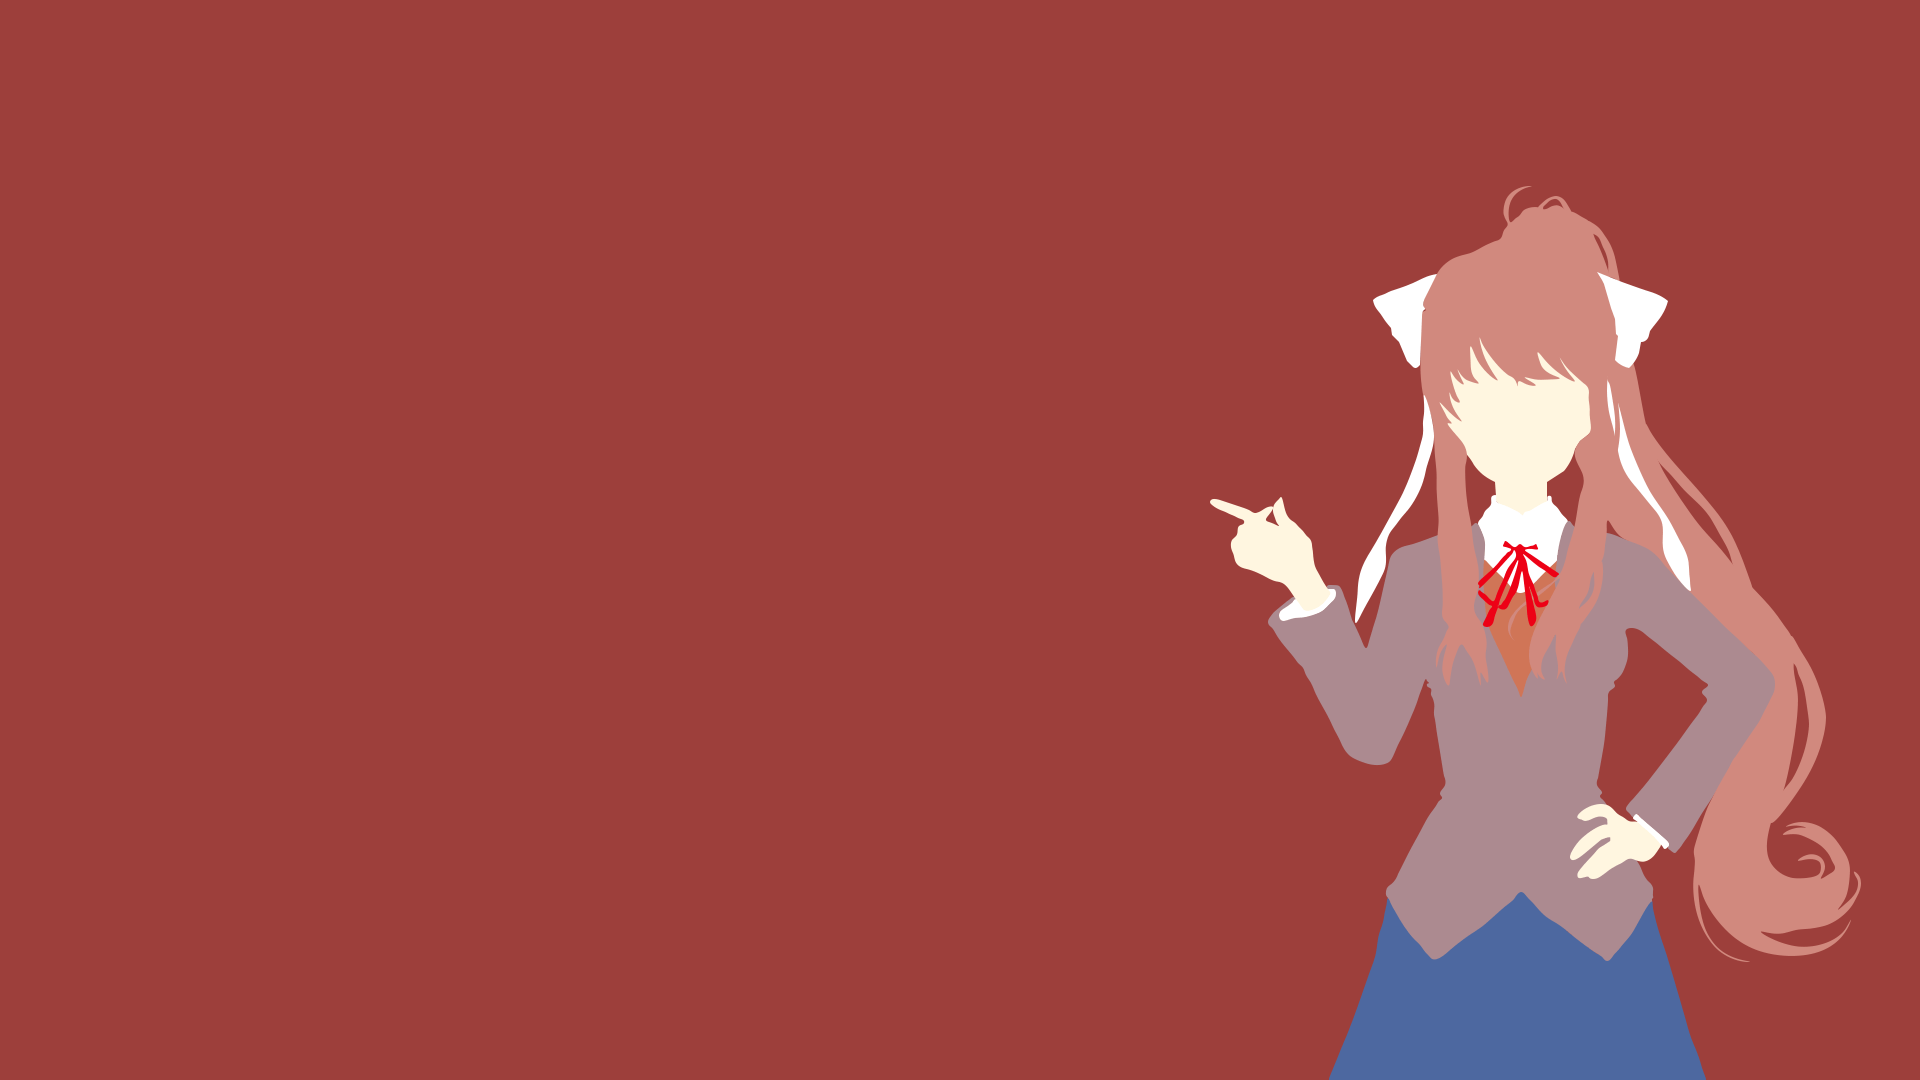 Aesthetic minimalistic wallpaper of a cat girl from the anime series, Tohru. - Shrek